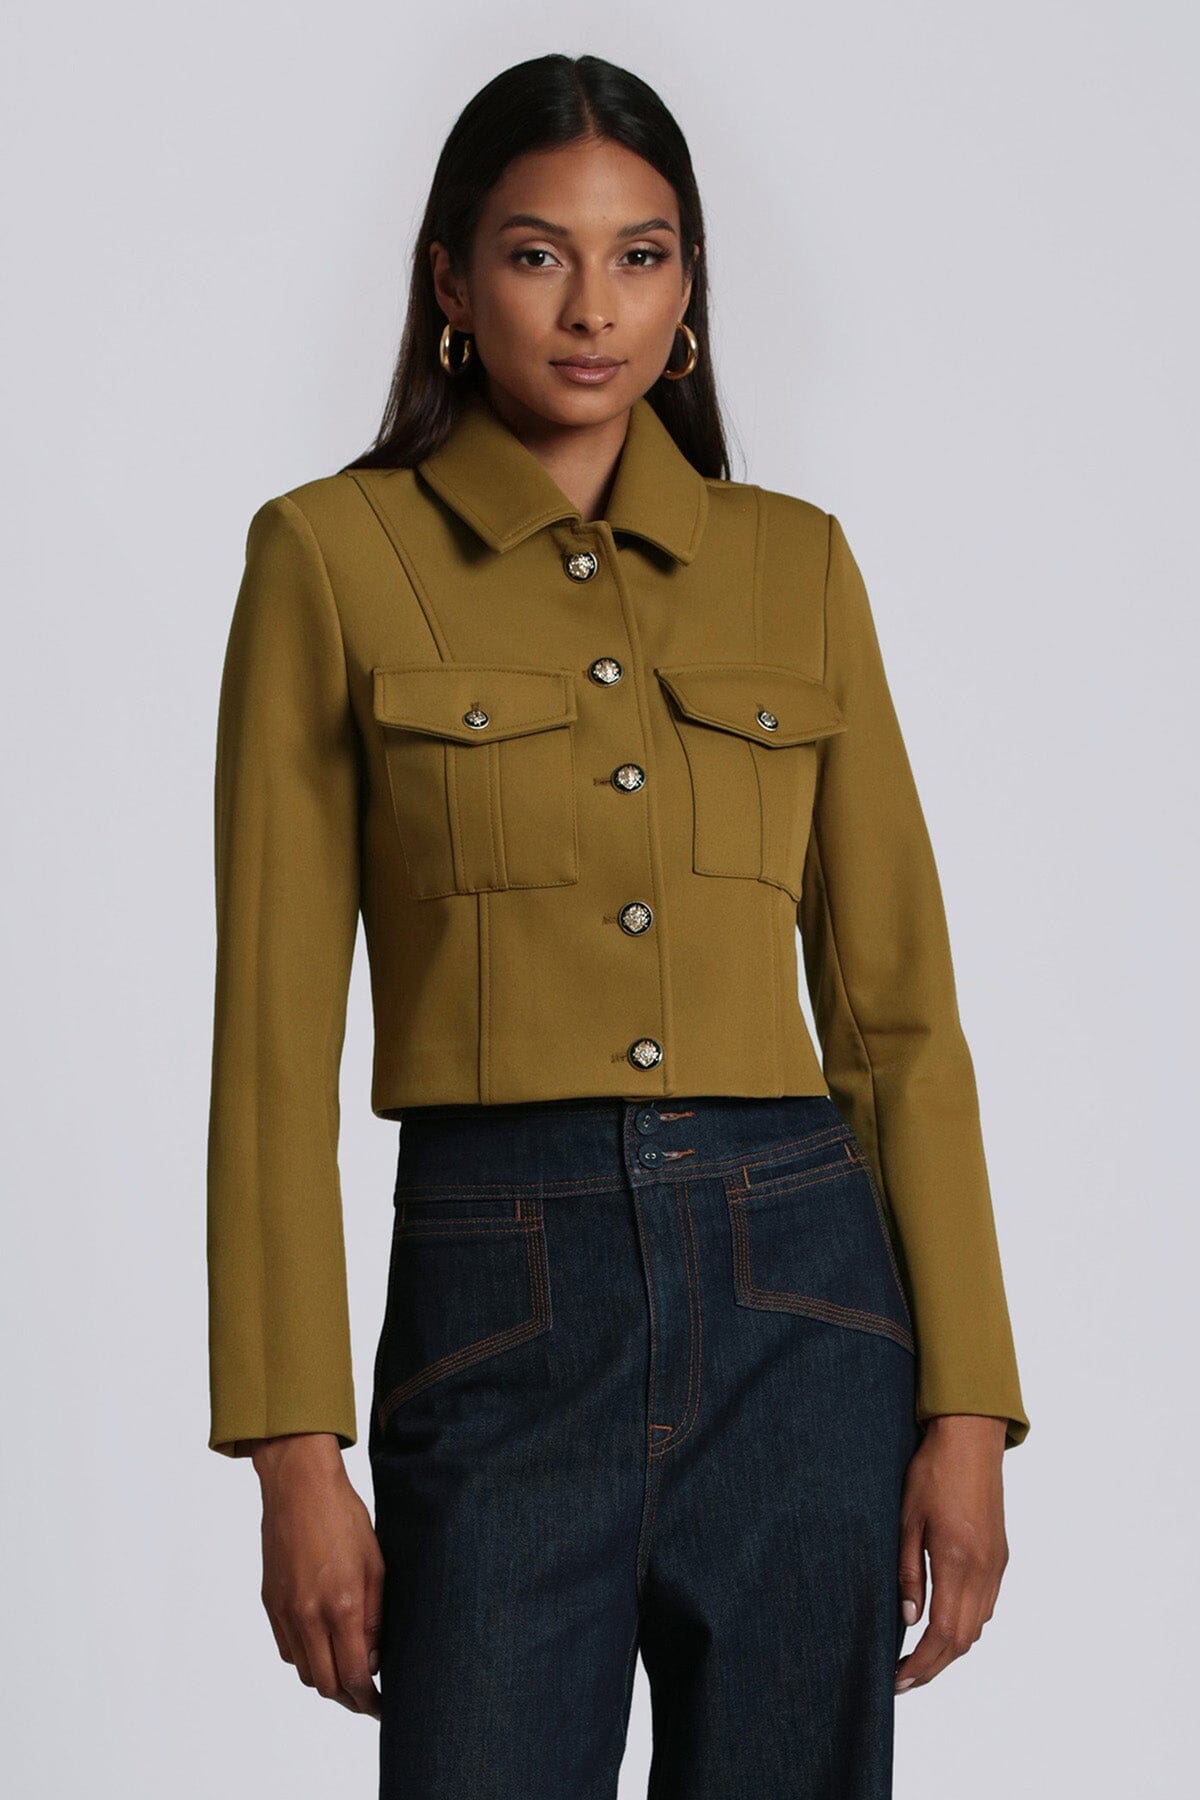 Olive Green Cropped Bonded Knit Military Jacket Outerwear